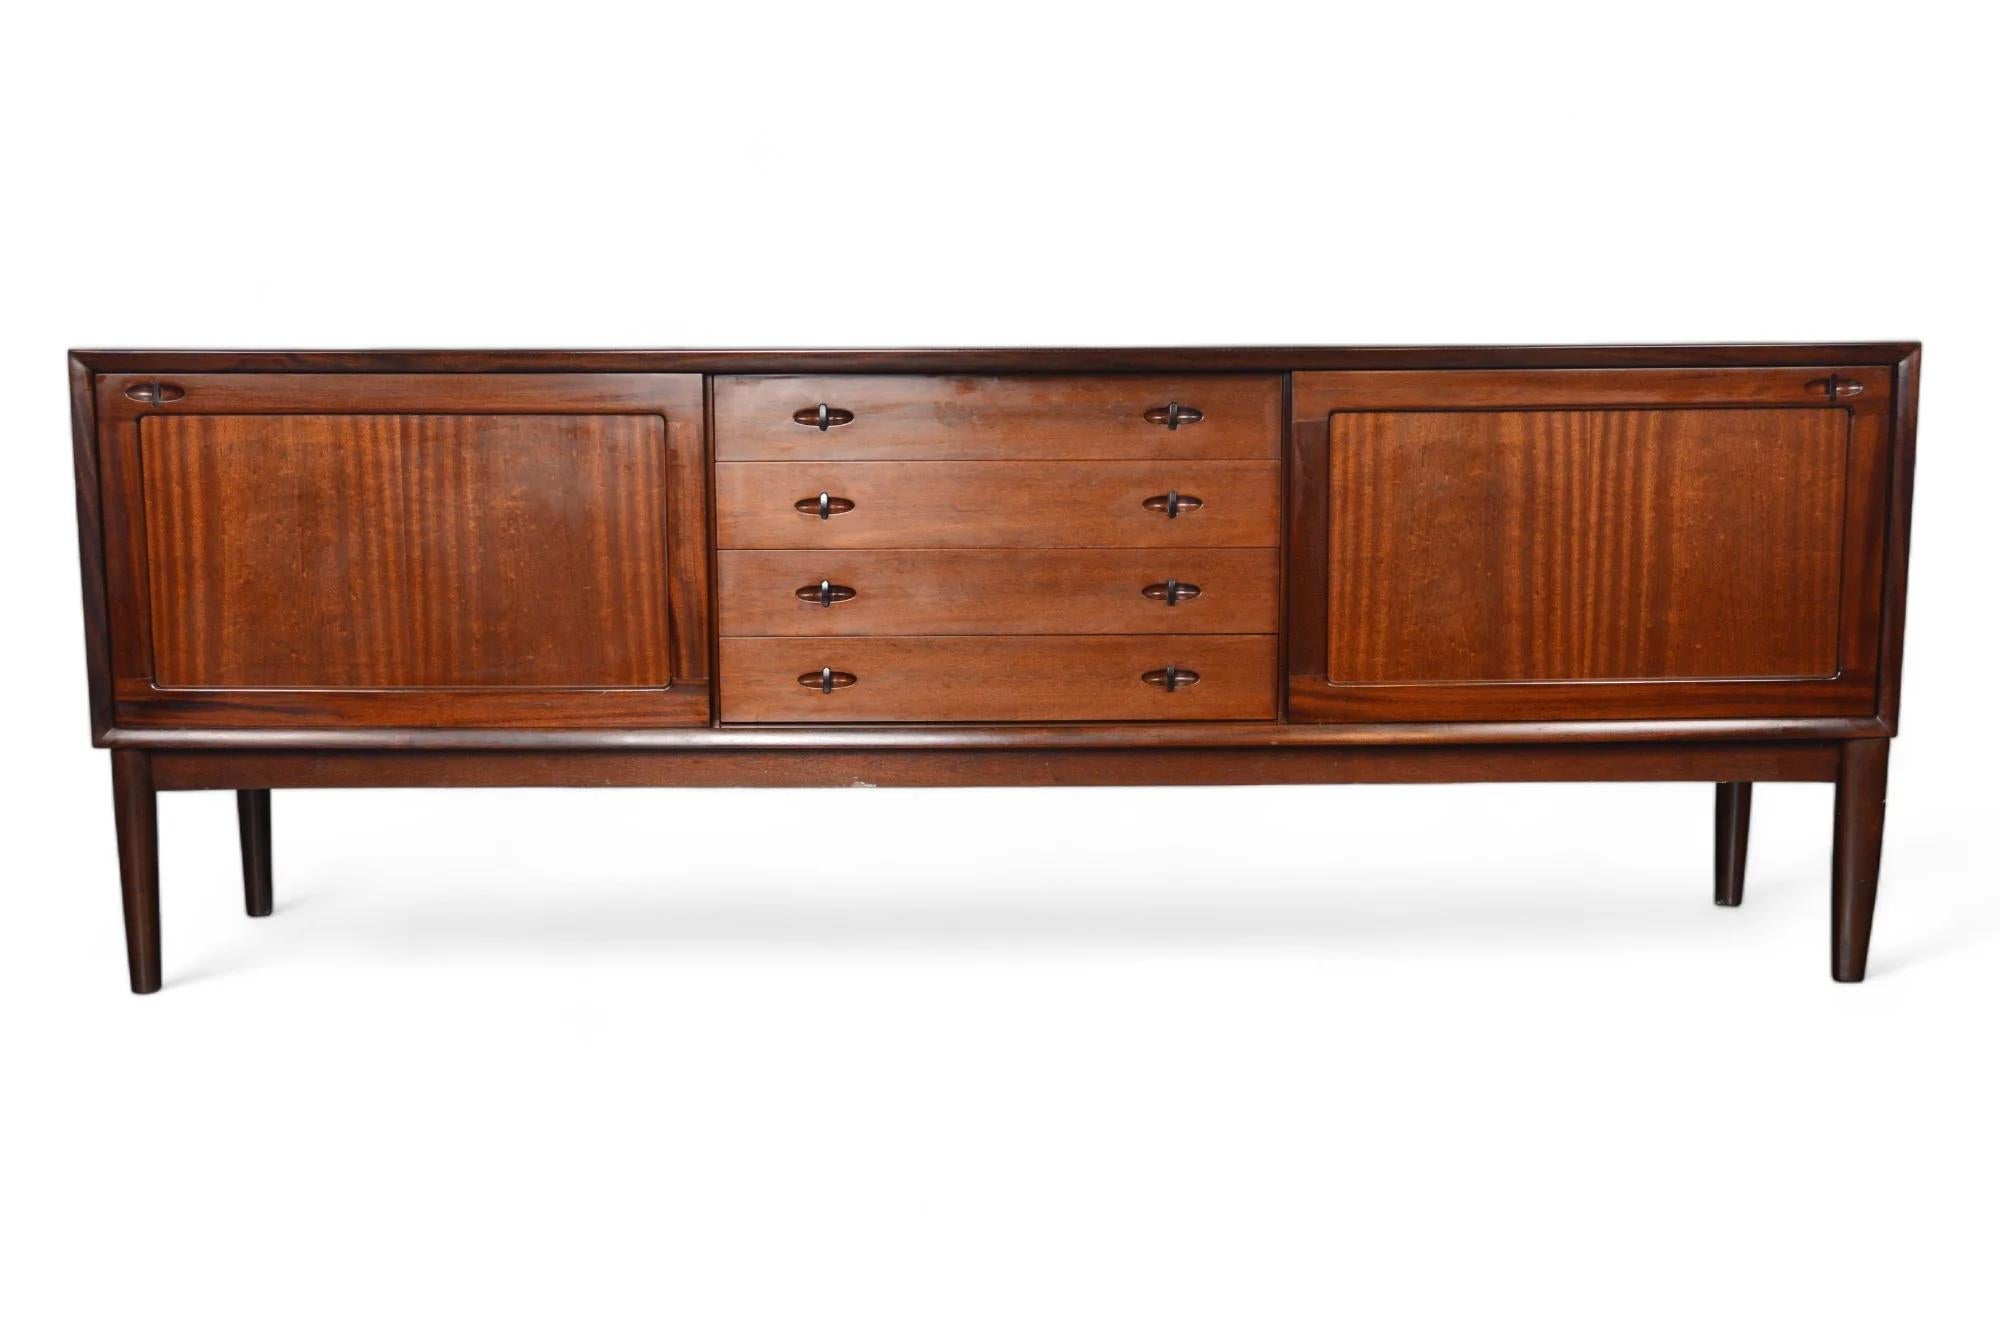 Origin: Denmark
Designer: H.W. Klein
Manufacturer: Bramin
Era: 1960s
Materials: Mahogany
Measurements: 88.5″ wide x 18″ deep x 32″ tall
Condition: In excellent original condition with typical wear for its vintage.

Price includes restoration /